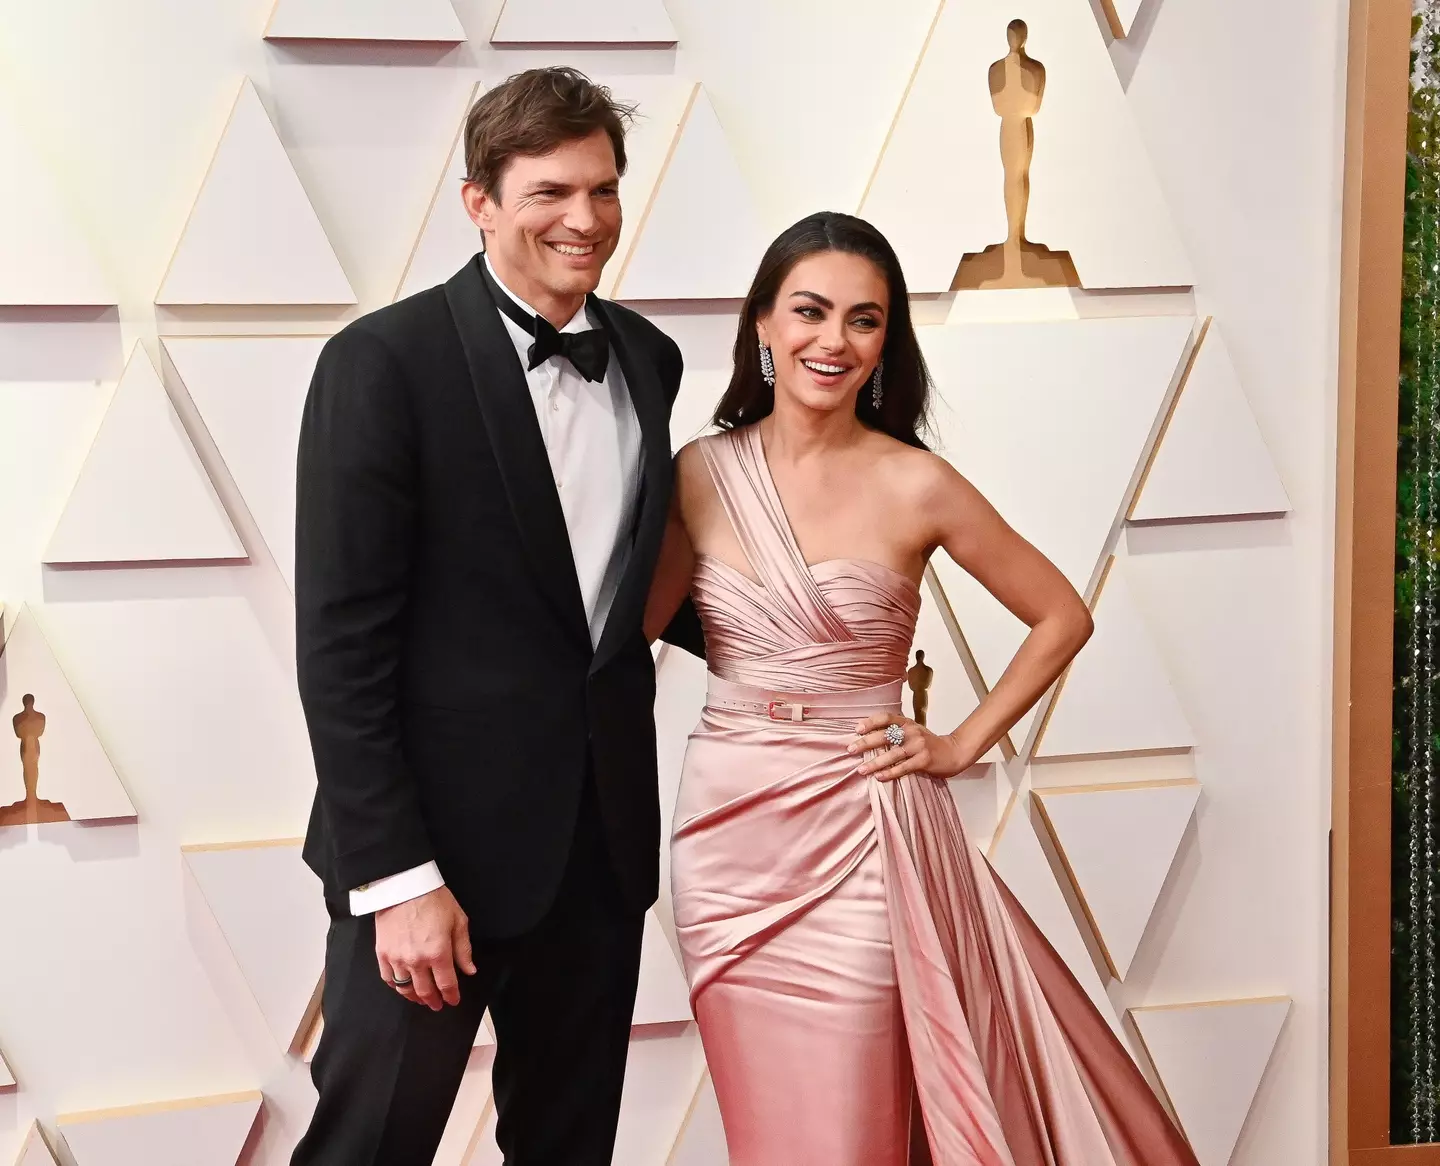 Kutcher and Kunis have been married since 2015.